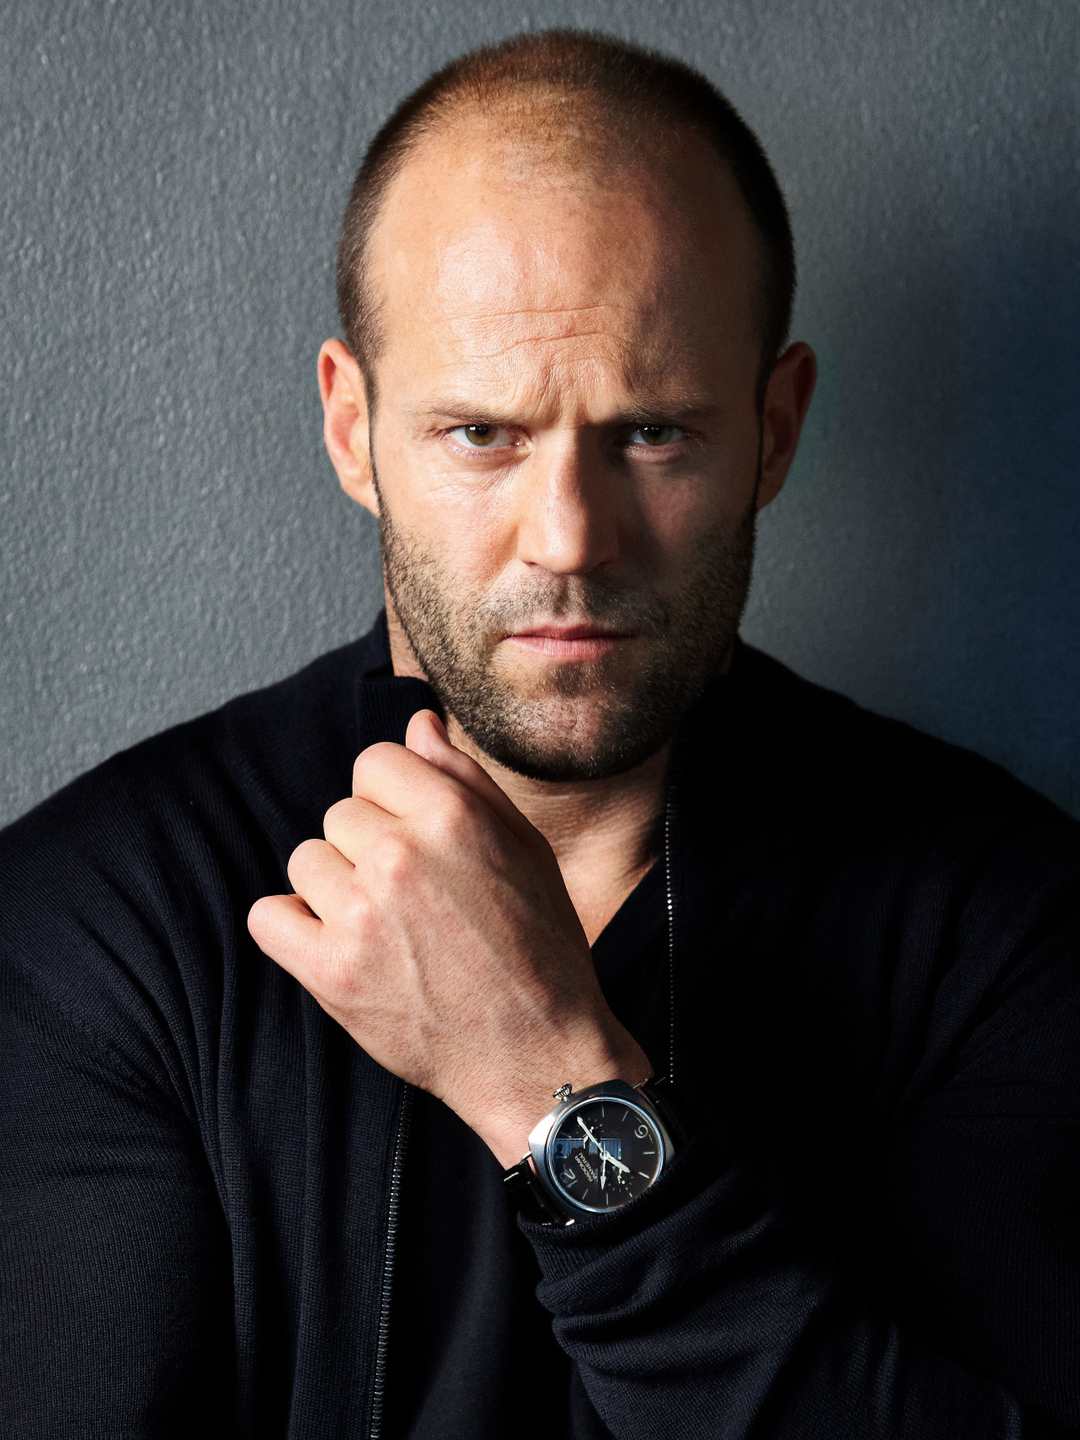 Jason Statham where is he now